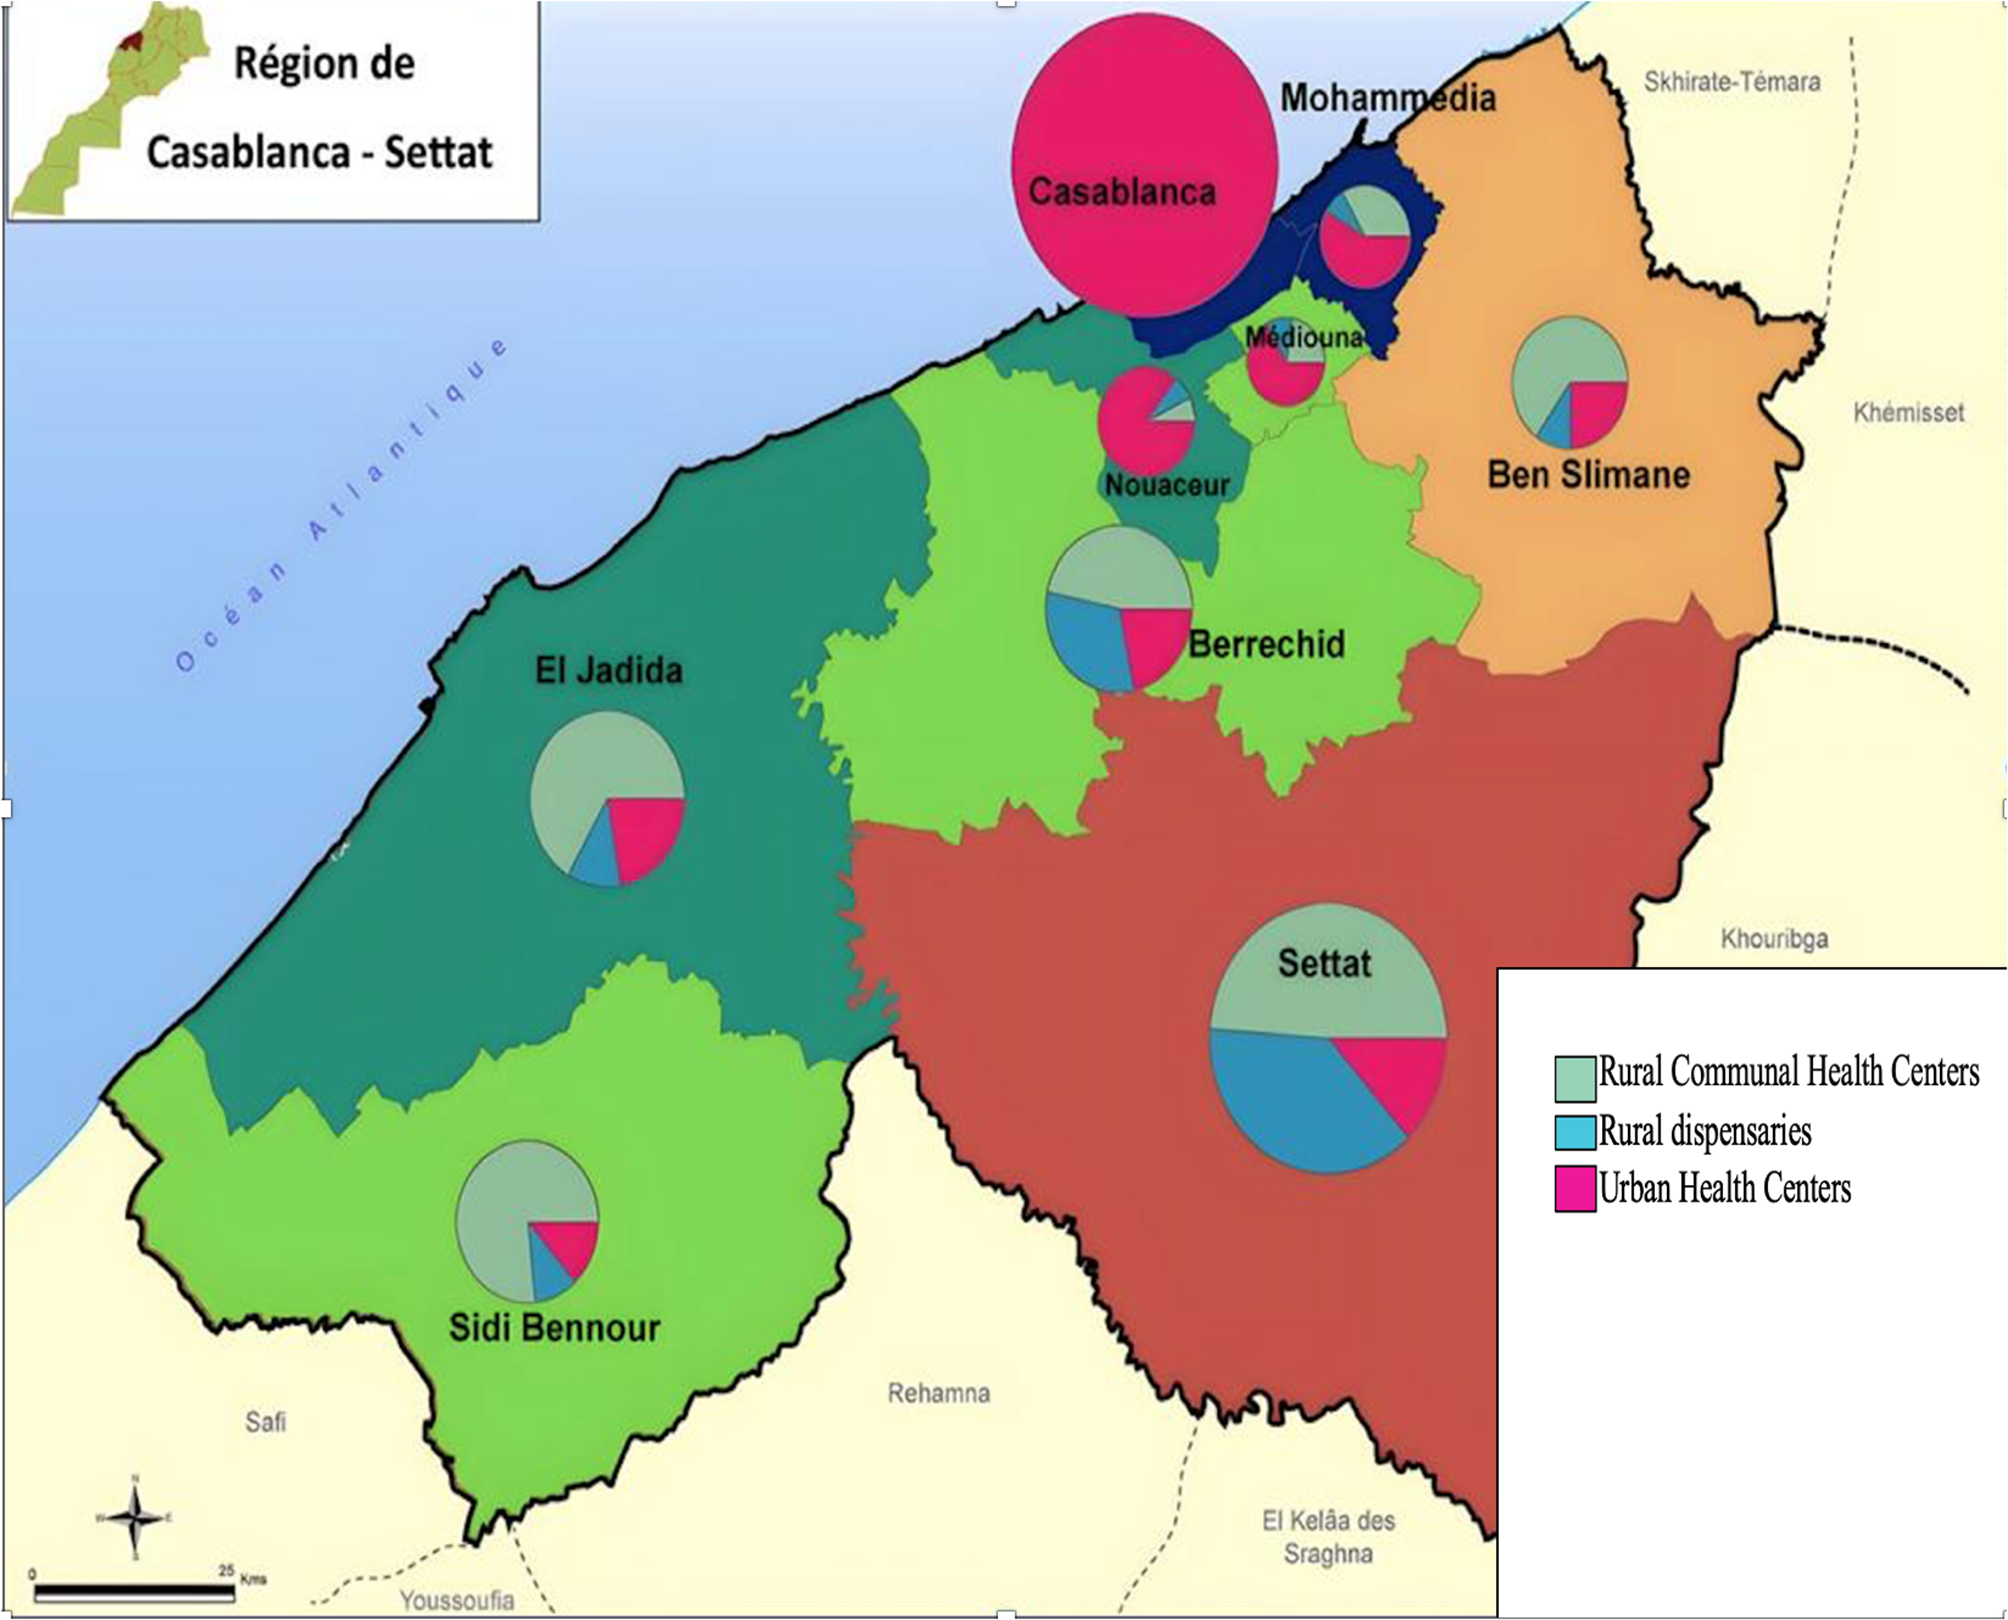 Ethnobotanical survey on herbal remedies for the management of type 2 diabetes in the Casablanca-Settat region, Morocco